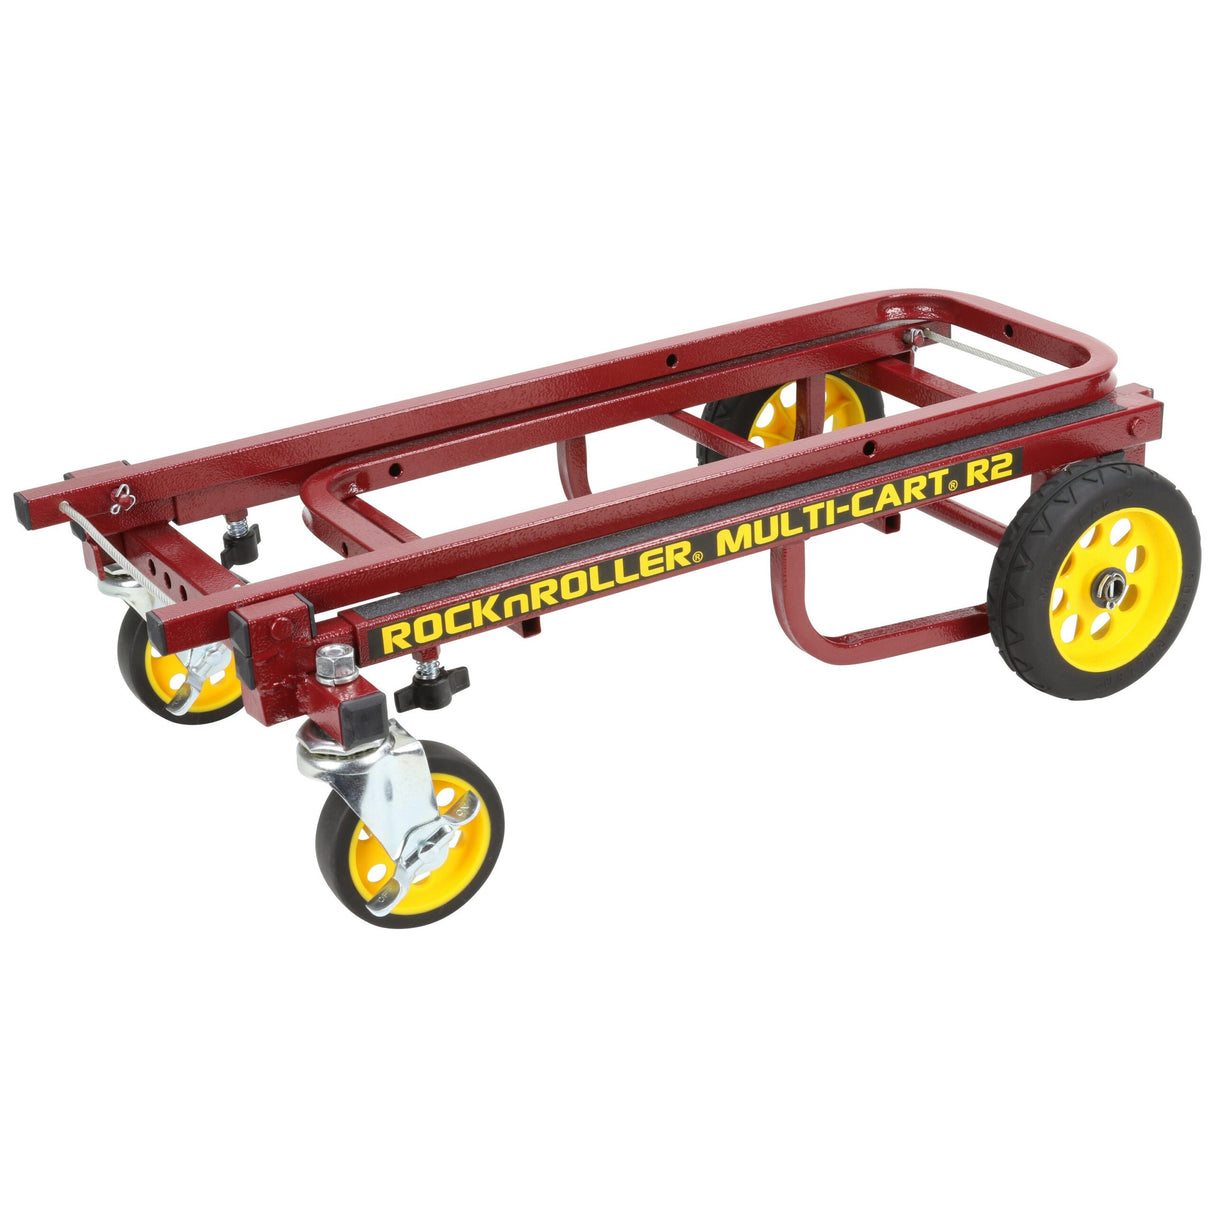 RockNRoller R2RT-RD R2 Micro Cart with R Trac, Red